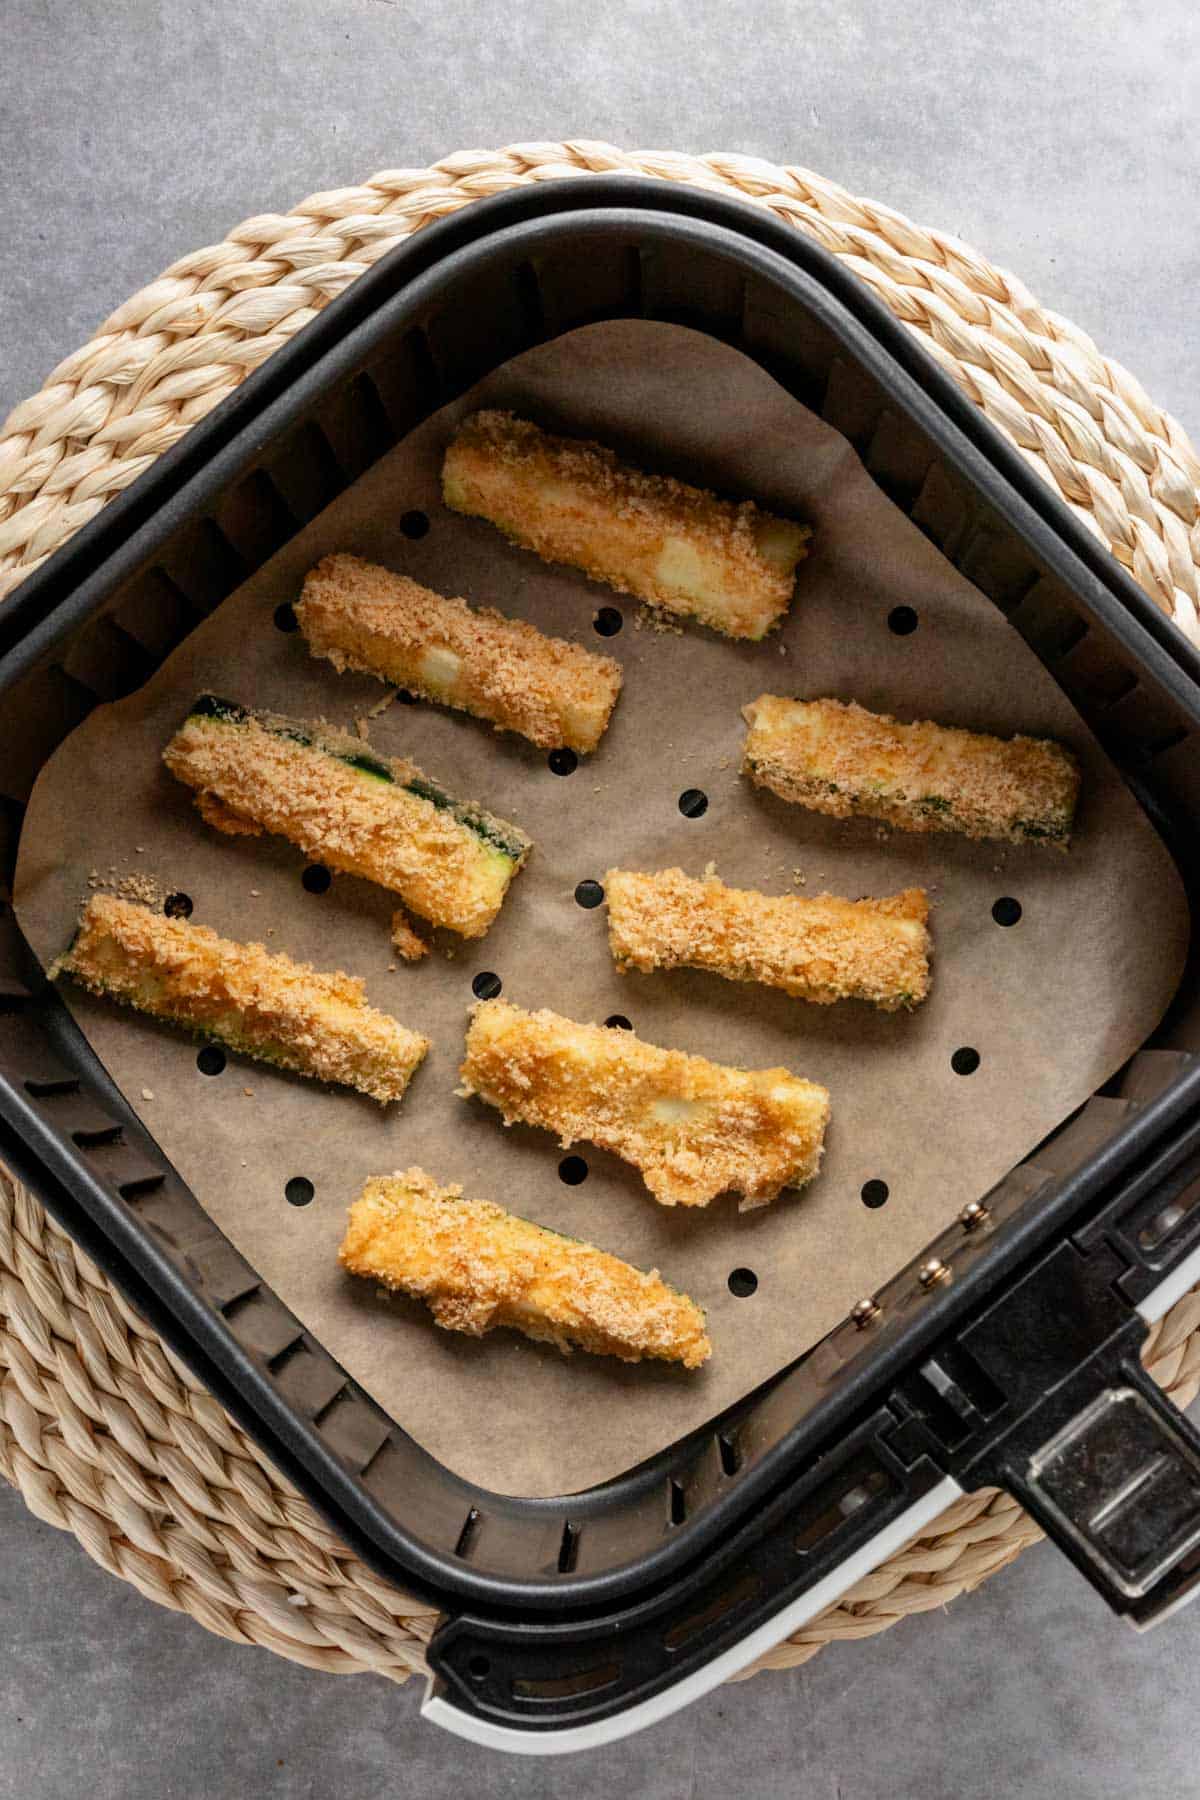 zucchini sticks in air fryer before cooking.